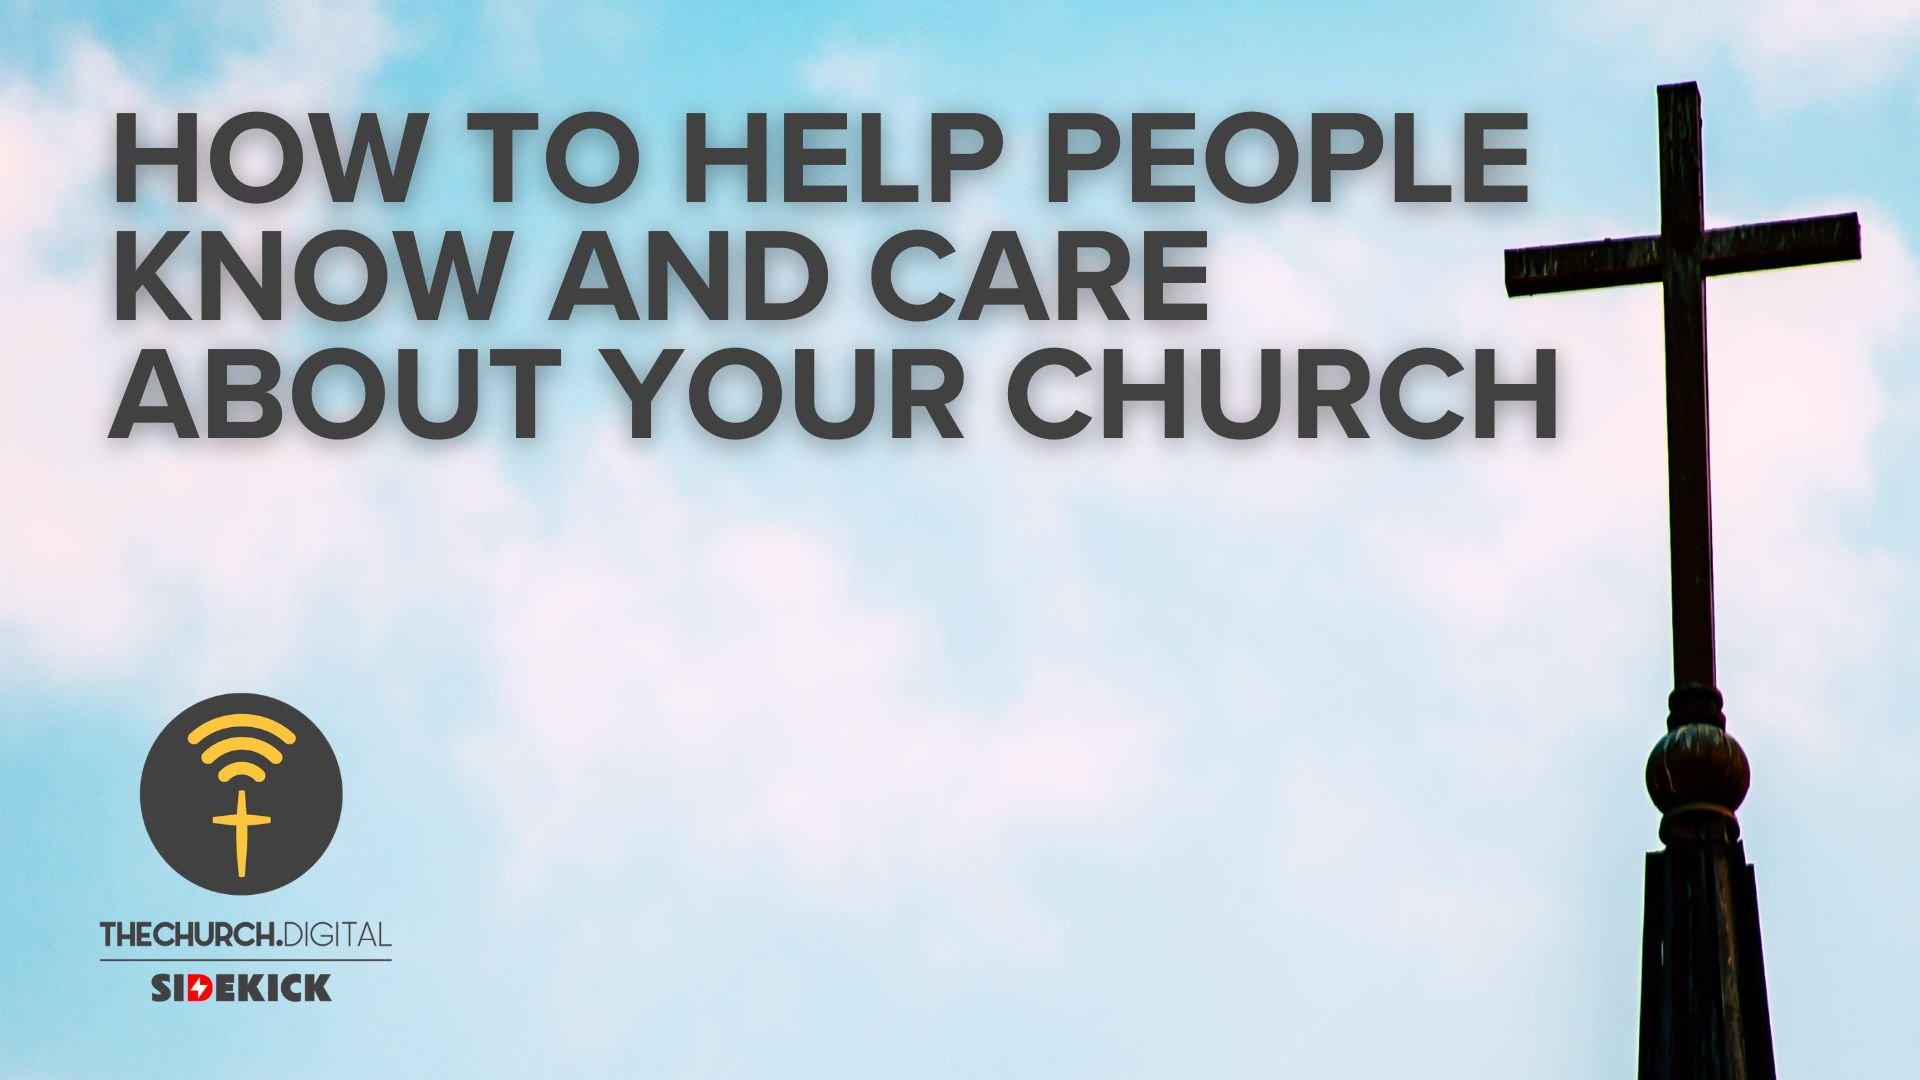 How to Help People Know and Care About Your Church